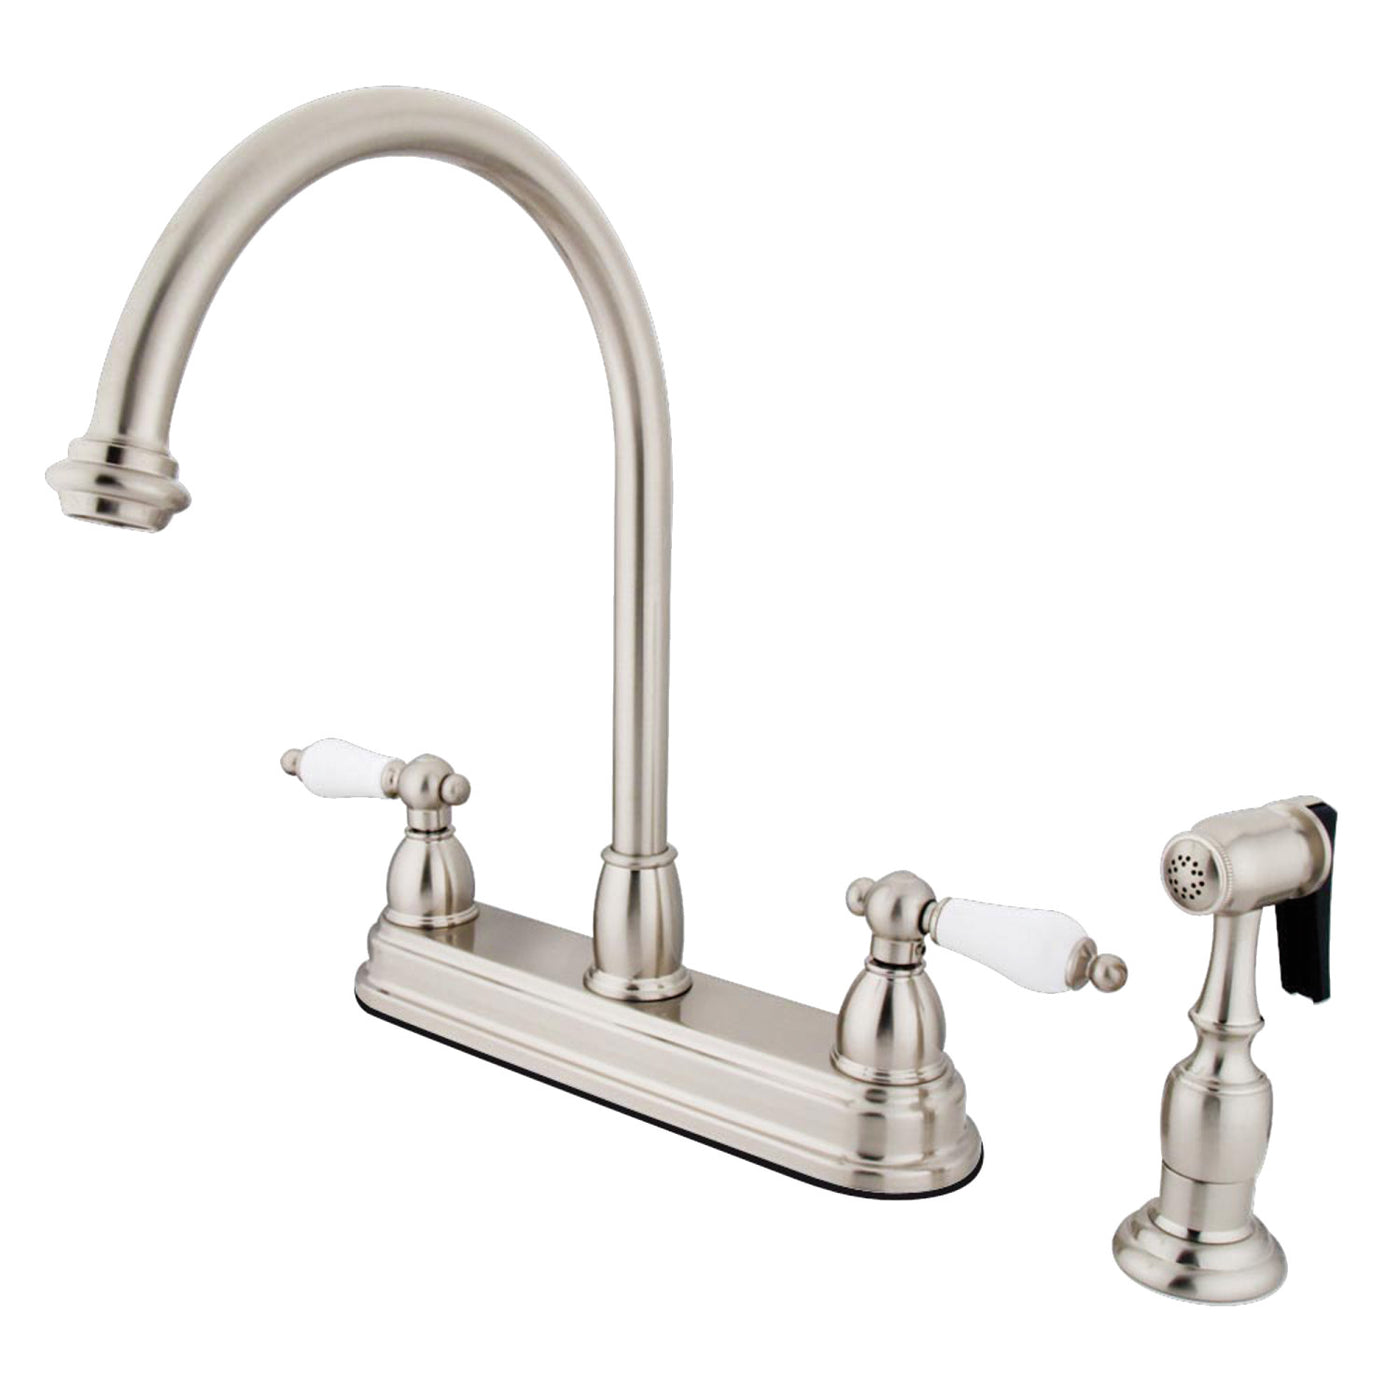 Elements of Design EB3758PLBS Centerset Kitchen Faucet, Brushed Nickel